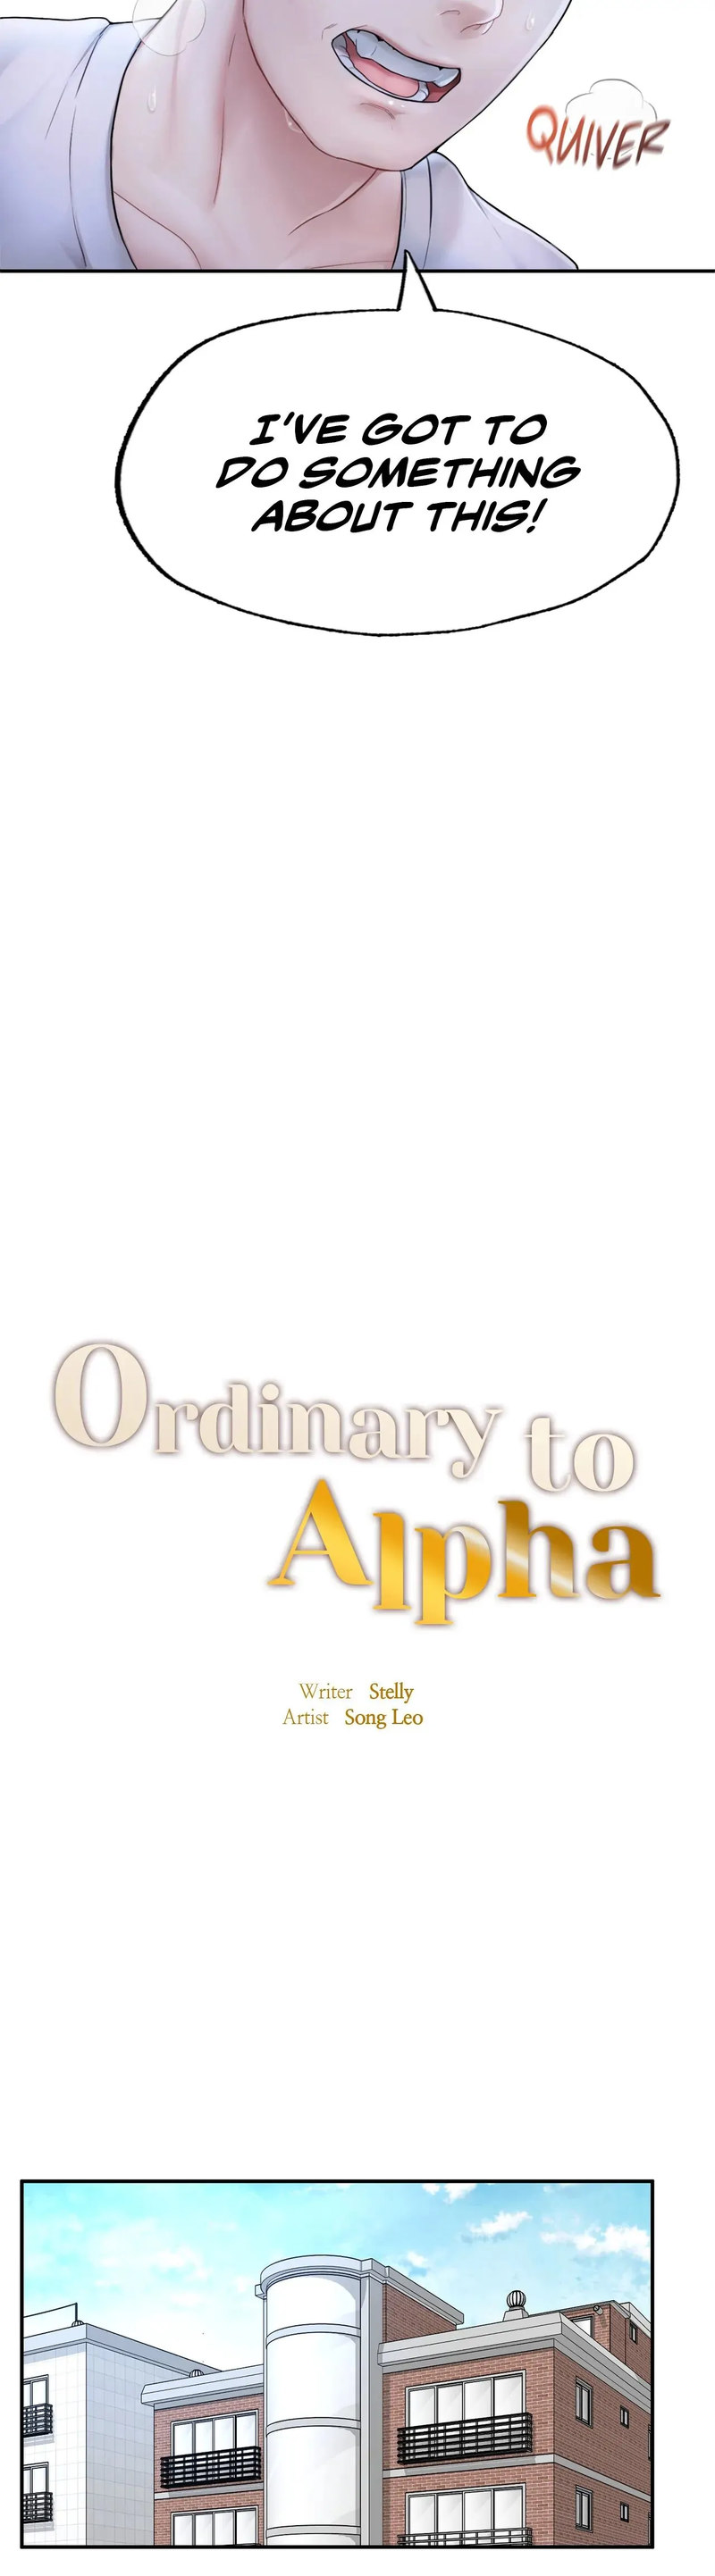 Ordinary to Alpha - Chapter 2 Page 2